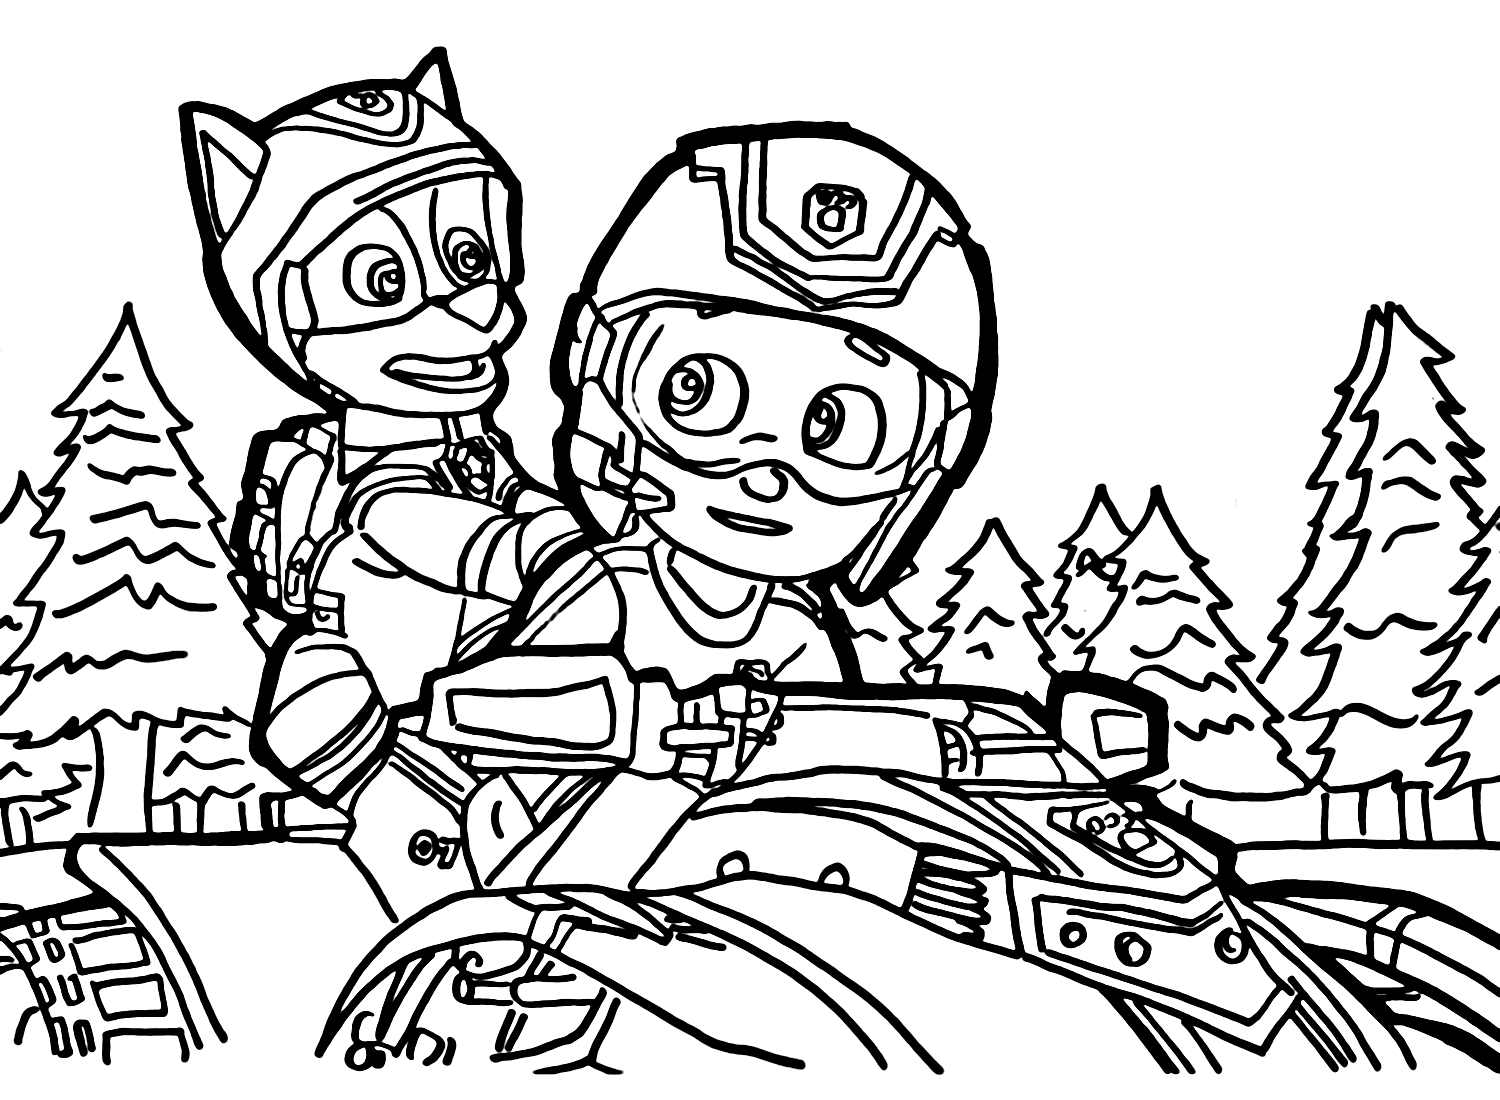 Ryder and Chase Coloring Pages